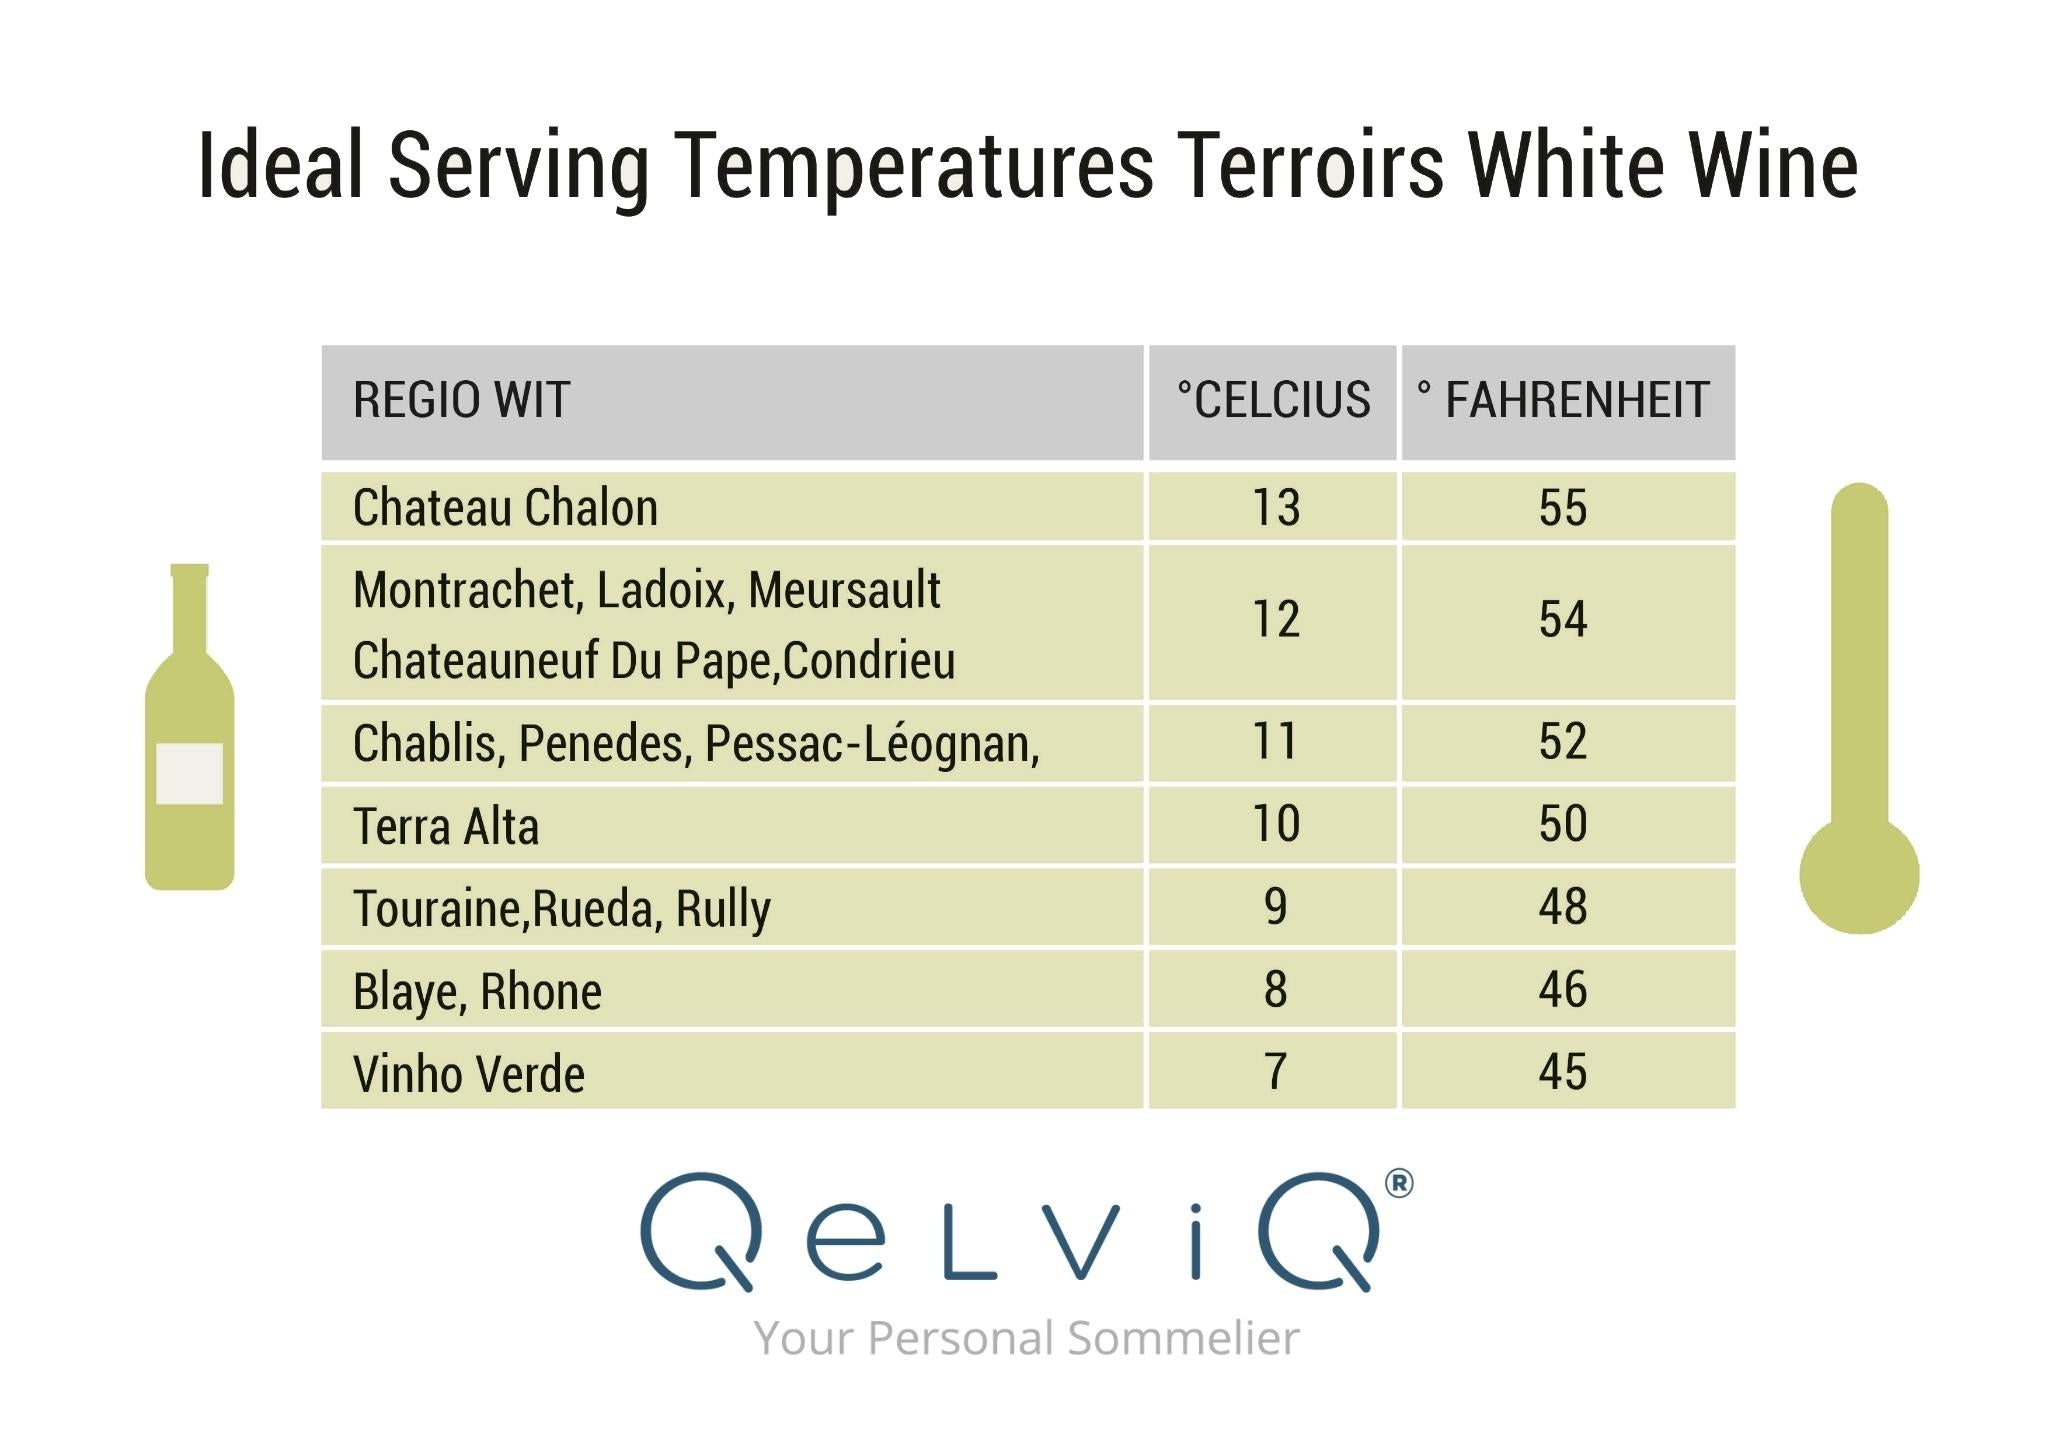 Ideal serving temperatures for white wine terroir